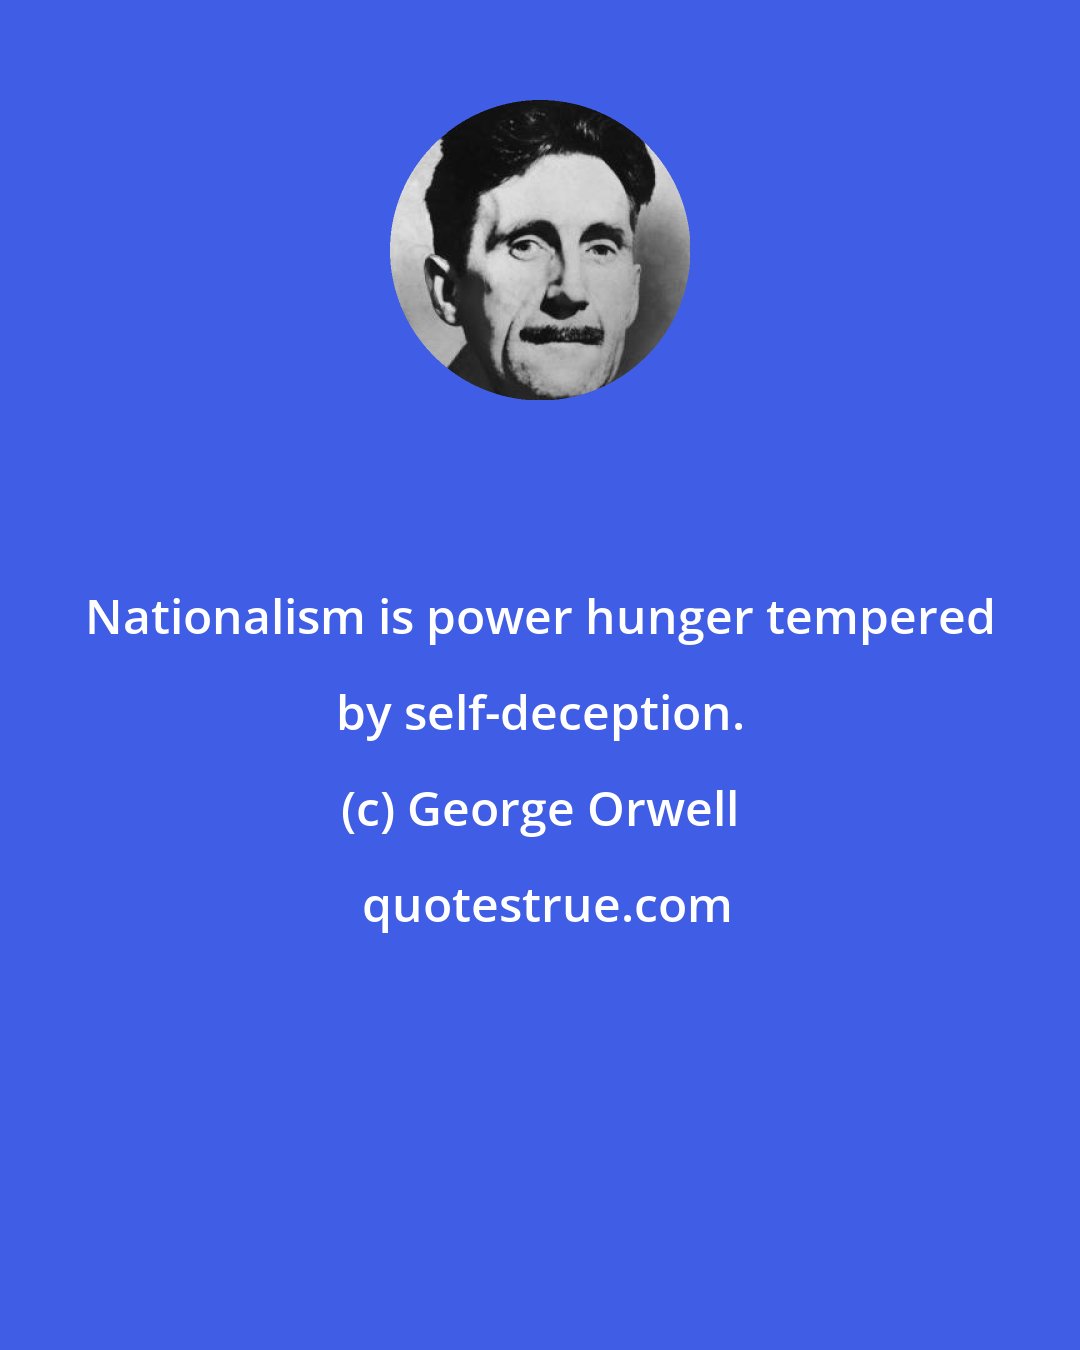 George Orwell: Nationalism is power hunger tempered by self-deception.